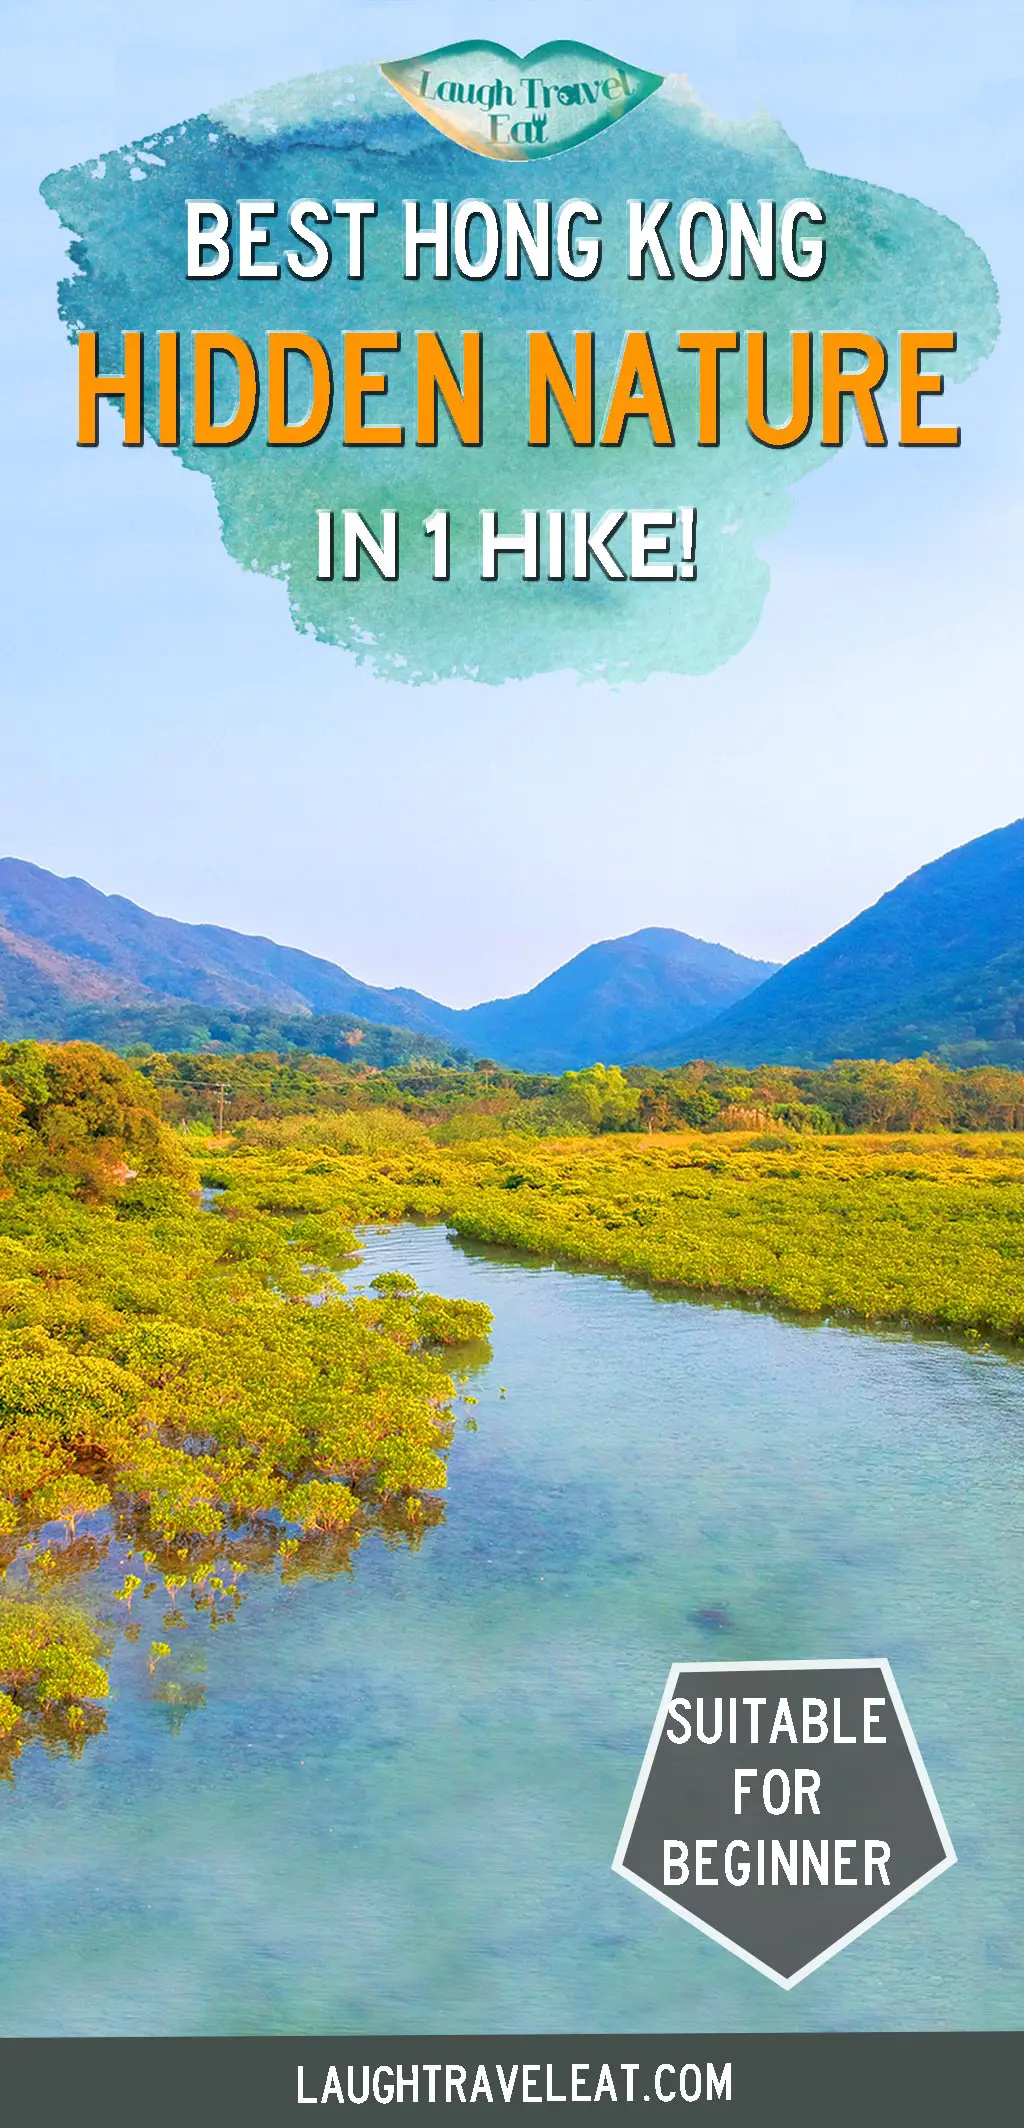 A Sai Kung hike from Pak Sha O to Lai Chi Chong, a geopark, Sham Chung with its grass field, and Yung Shue O mangrove forest - in Hong Kong!